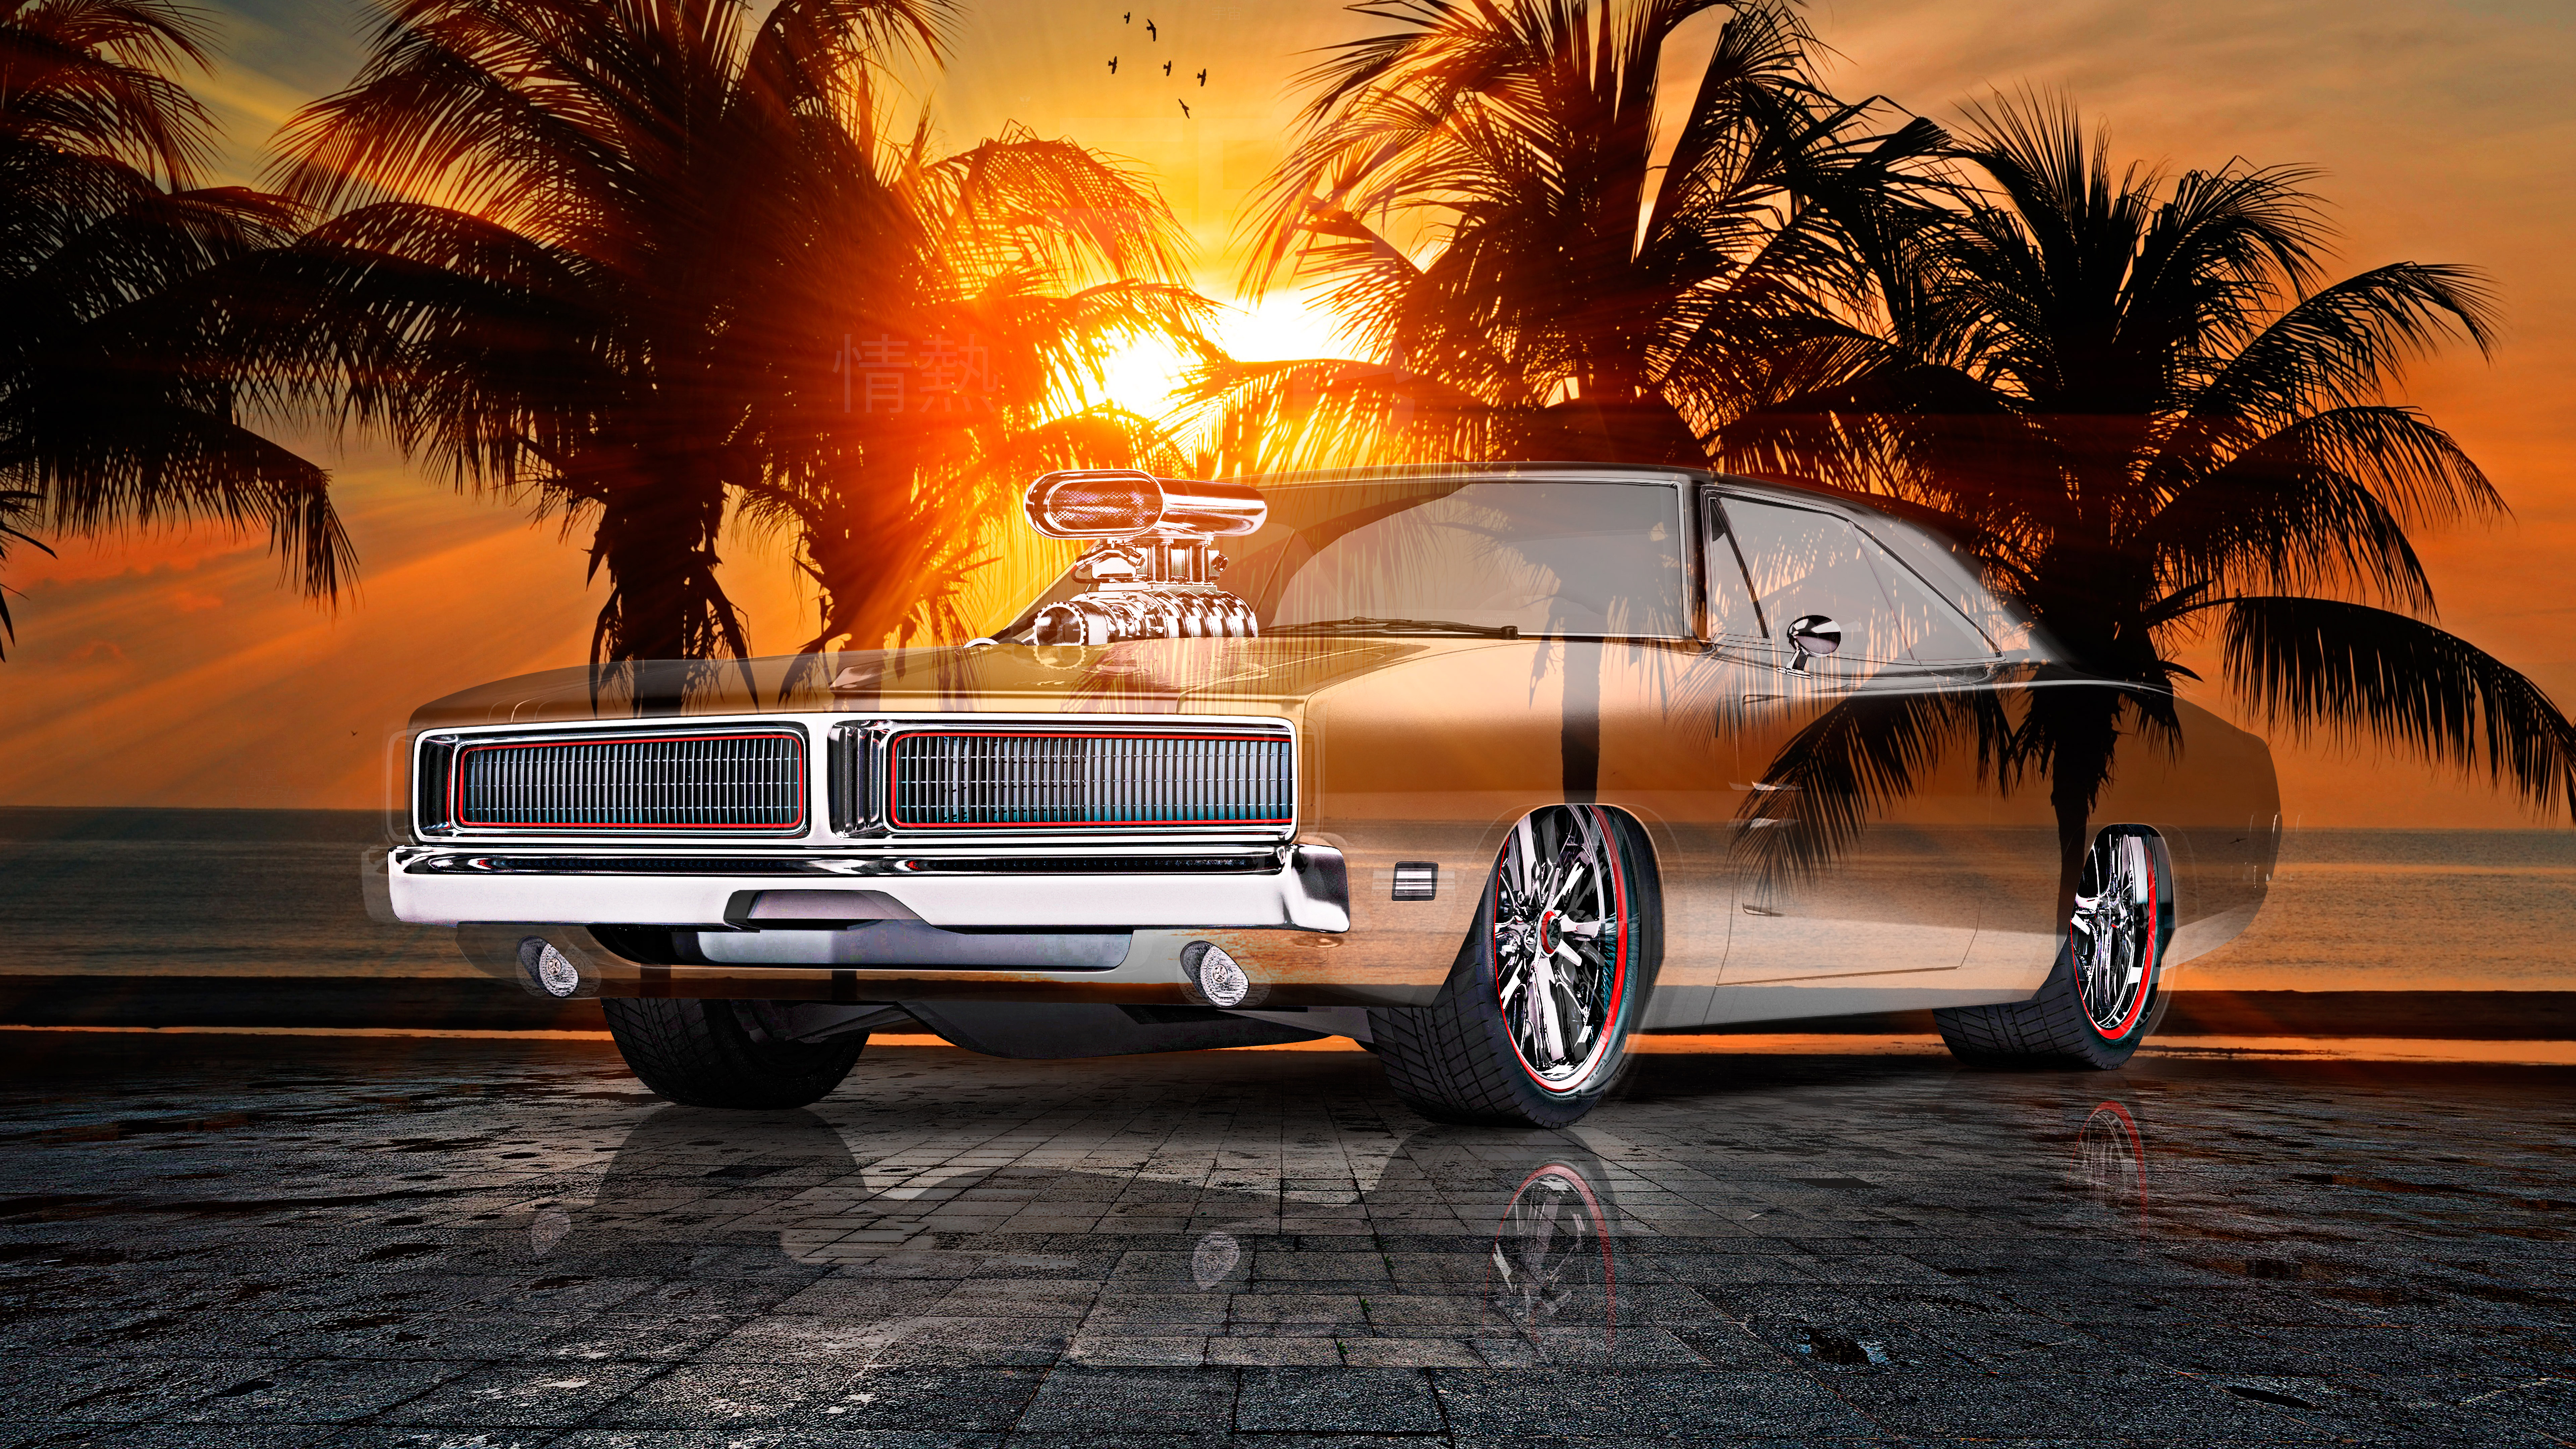 Dodge-Charger-1969-Muscle-Tuning-Super-Crystal-Passion-Soul-Sunset-Palm-Beach-Sea-Art-Car